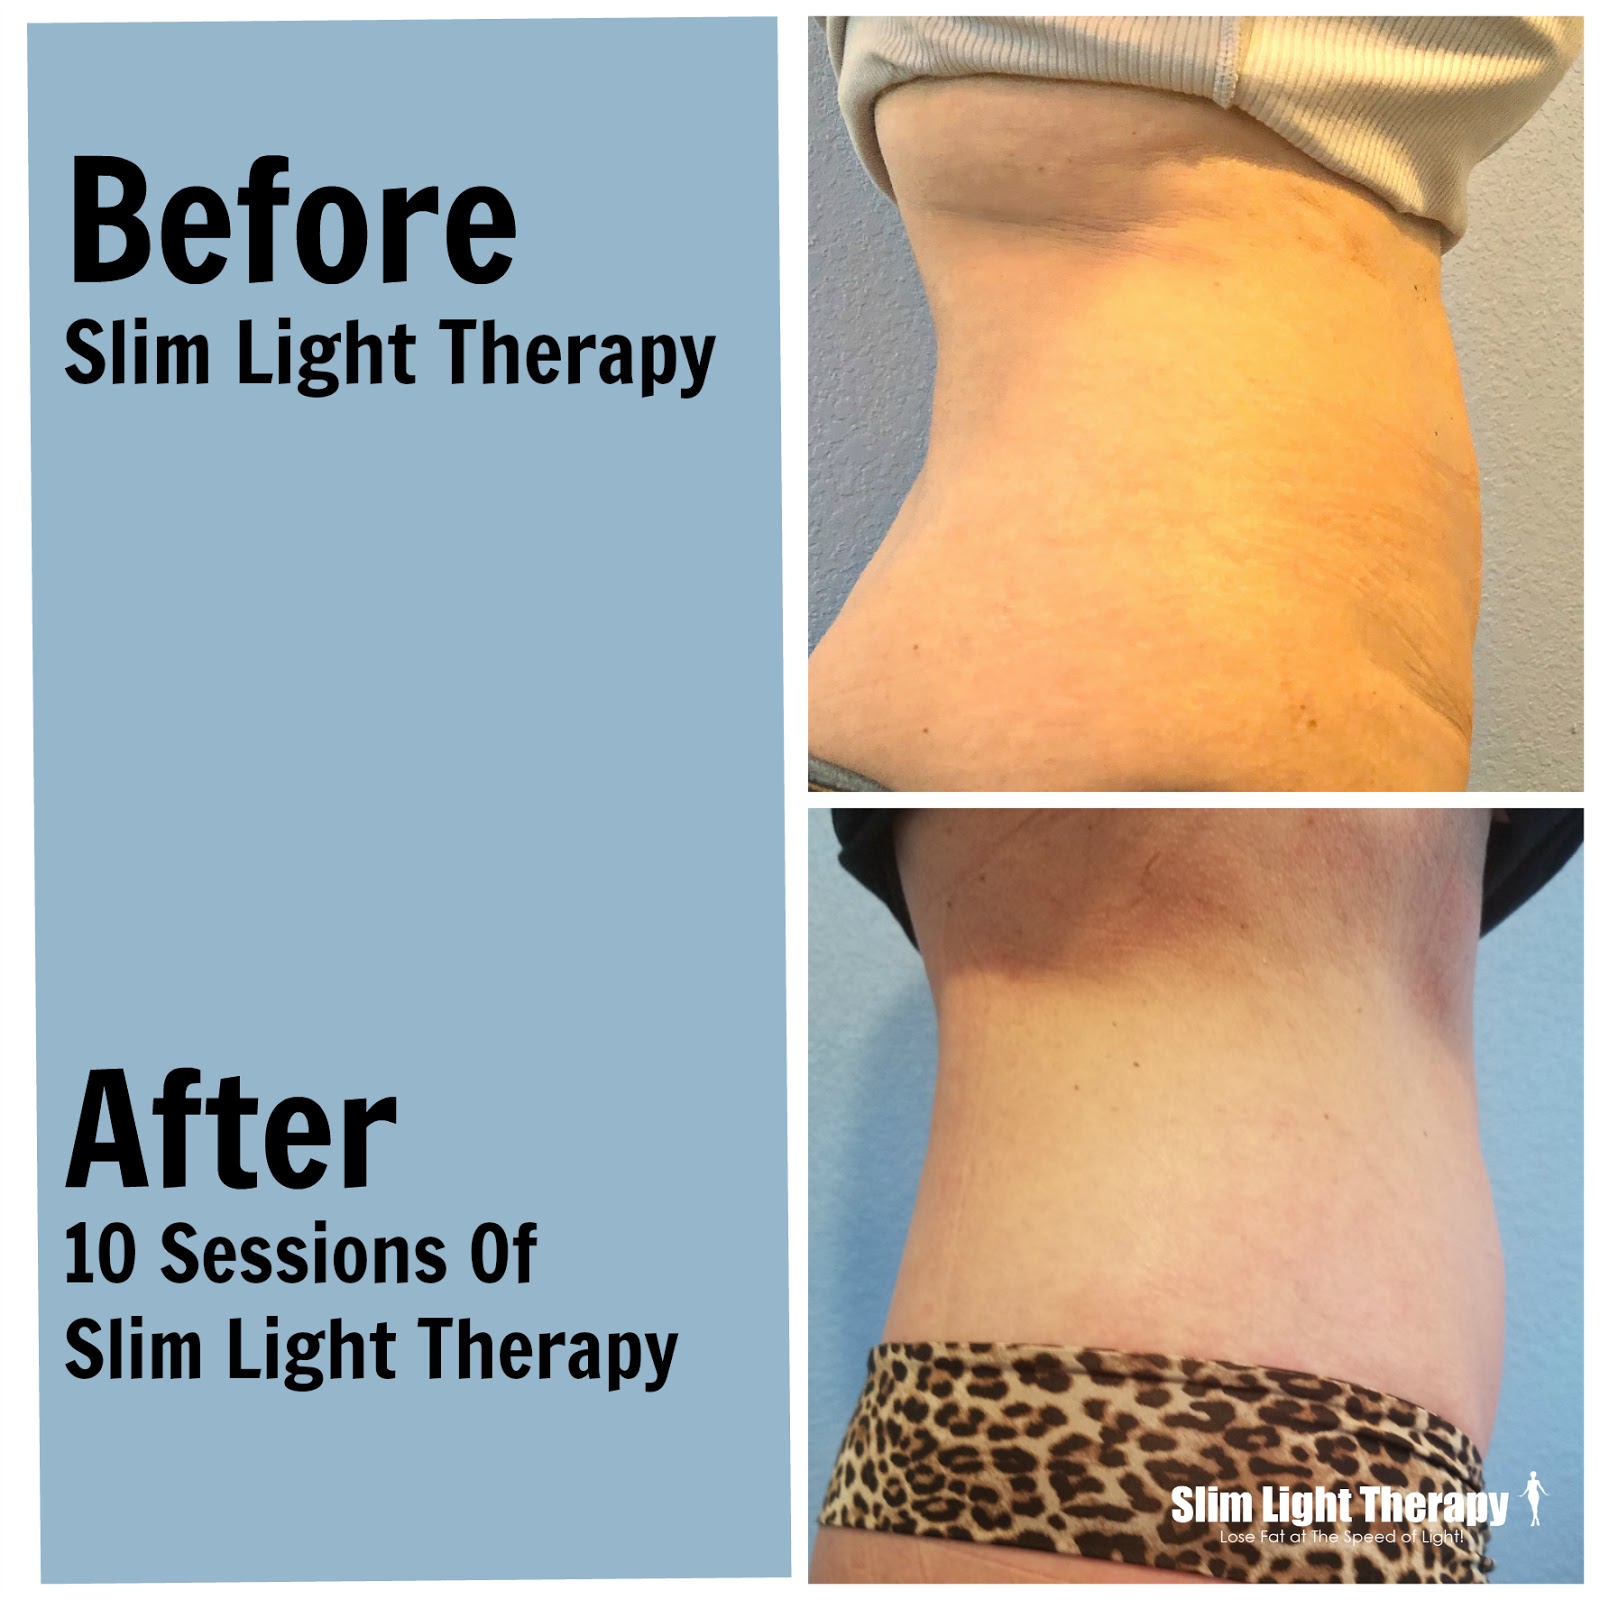 How to Use Red Light Therapy for Weight Loss?